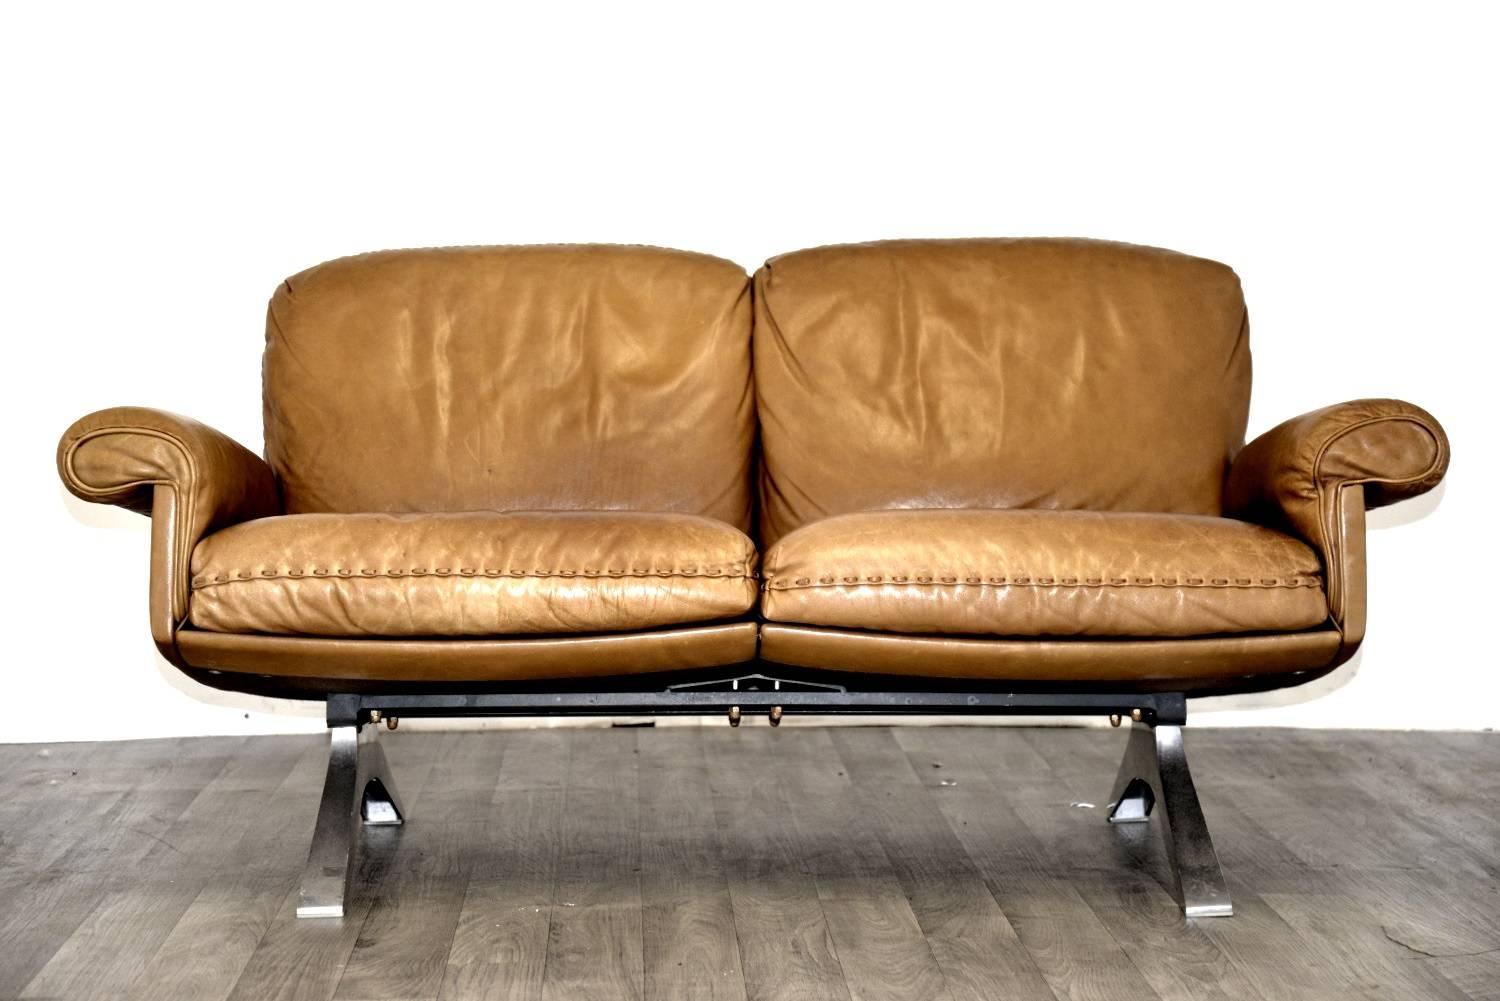 Discounted airfreight for our US and International customers (from 2 weeks door to door)

We are delighted to bring to you a highly desirable and rarely available matching pair of De Sede DS 31 sofas in beautiful soft cognac aniline leather with